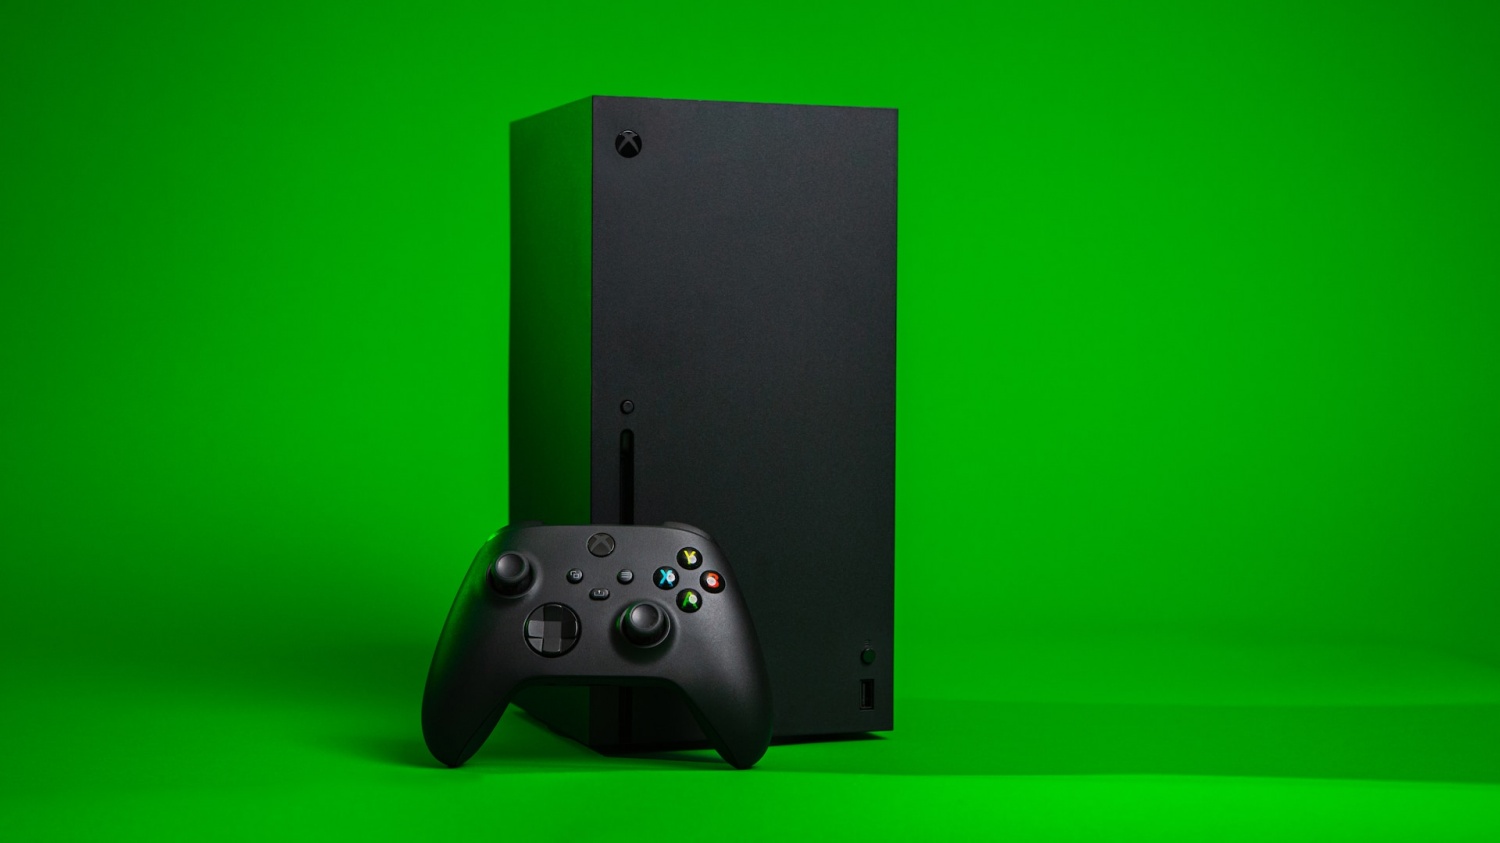 Xbox Series X and Xbox Game Pass Gets Price Hike: Microsoft Raising Prices for Everything?